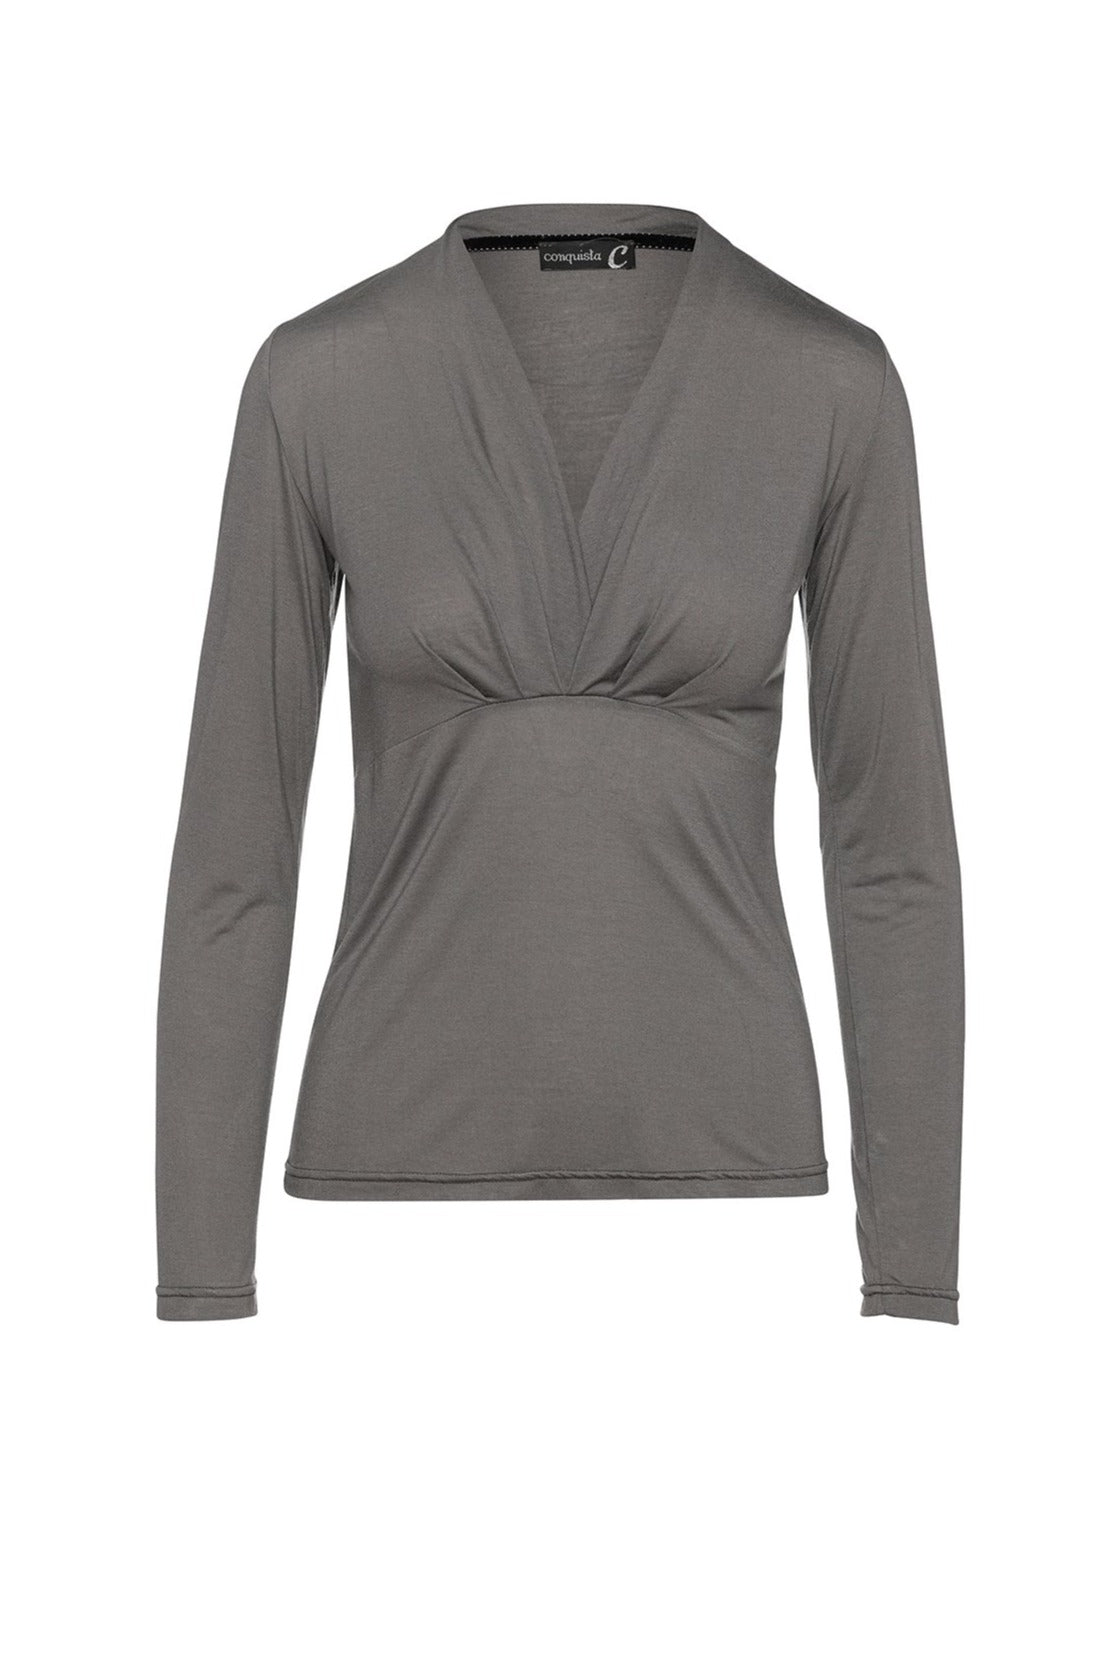 Women’s Dark Grey Cashmere Blend Long Sleeve Faux Wrap Top In Stretch Jersey Sustainable Fabric Large Conquista